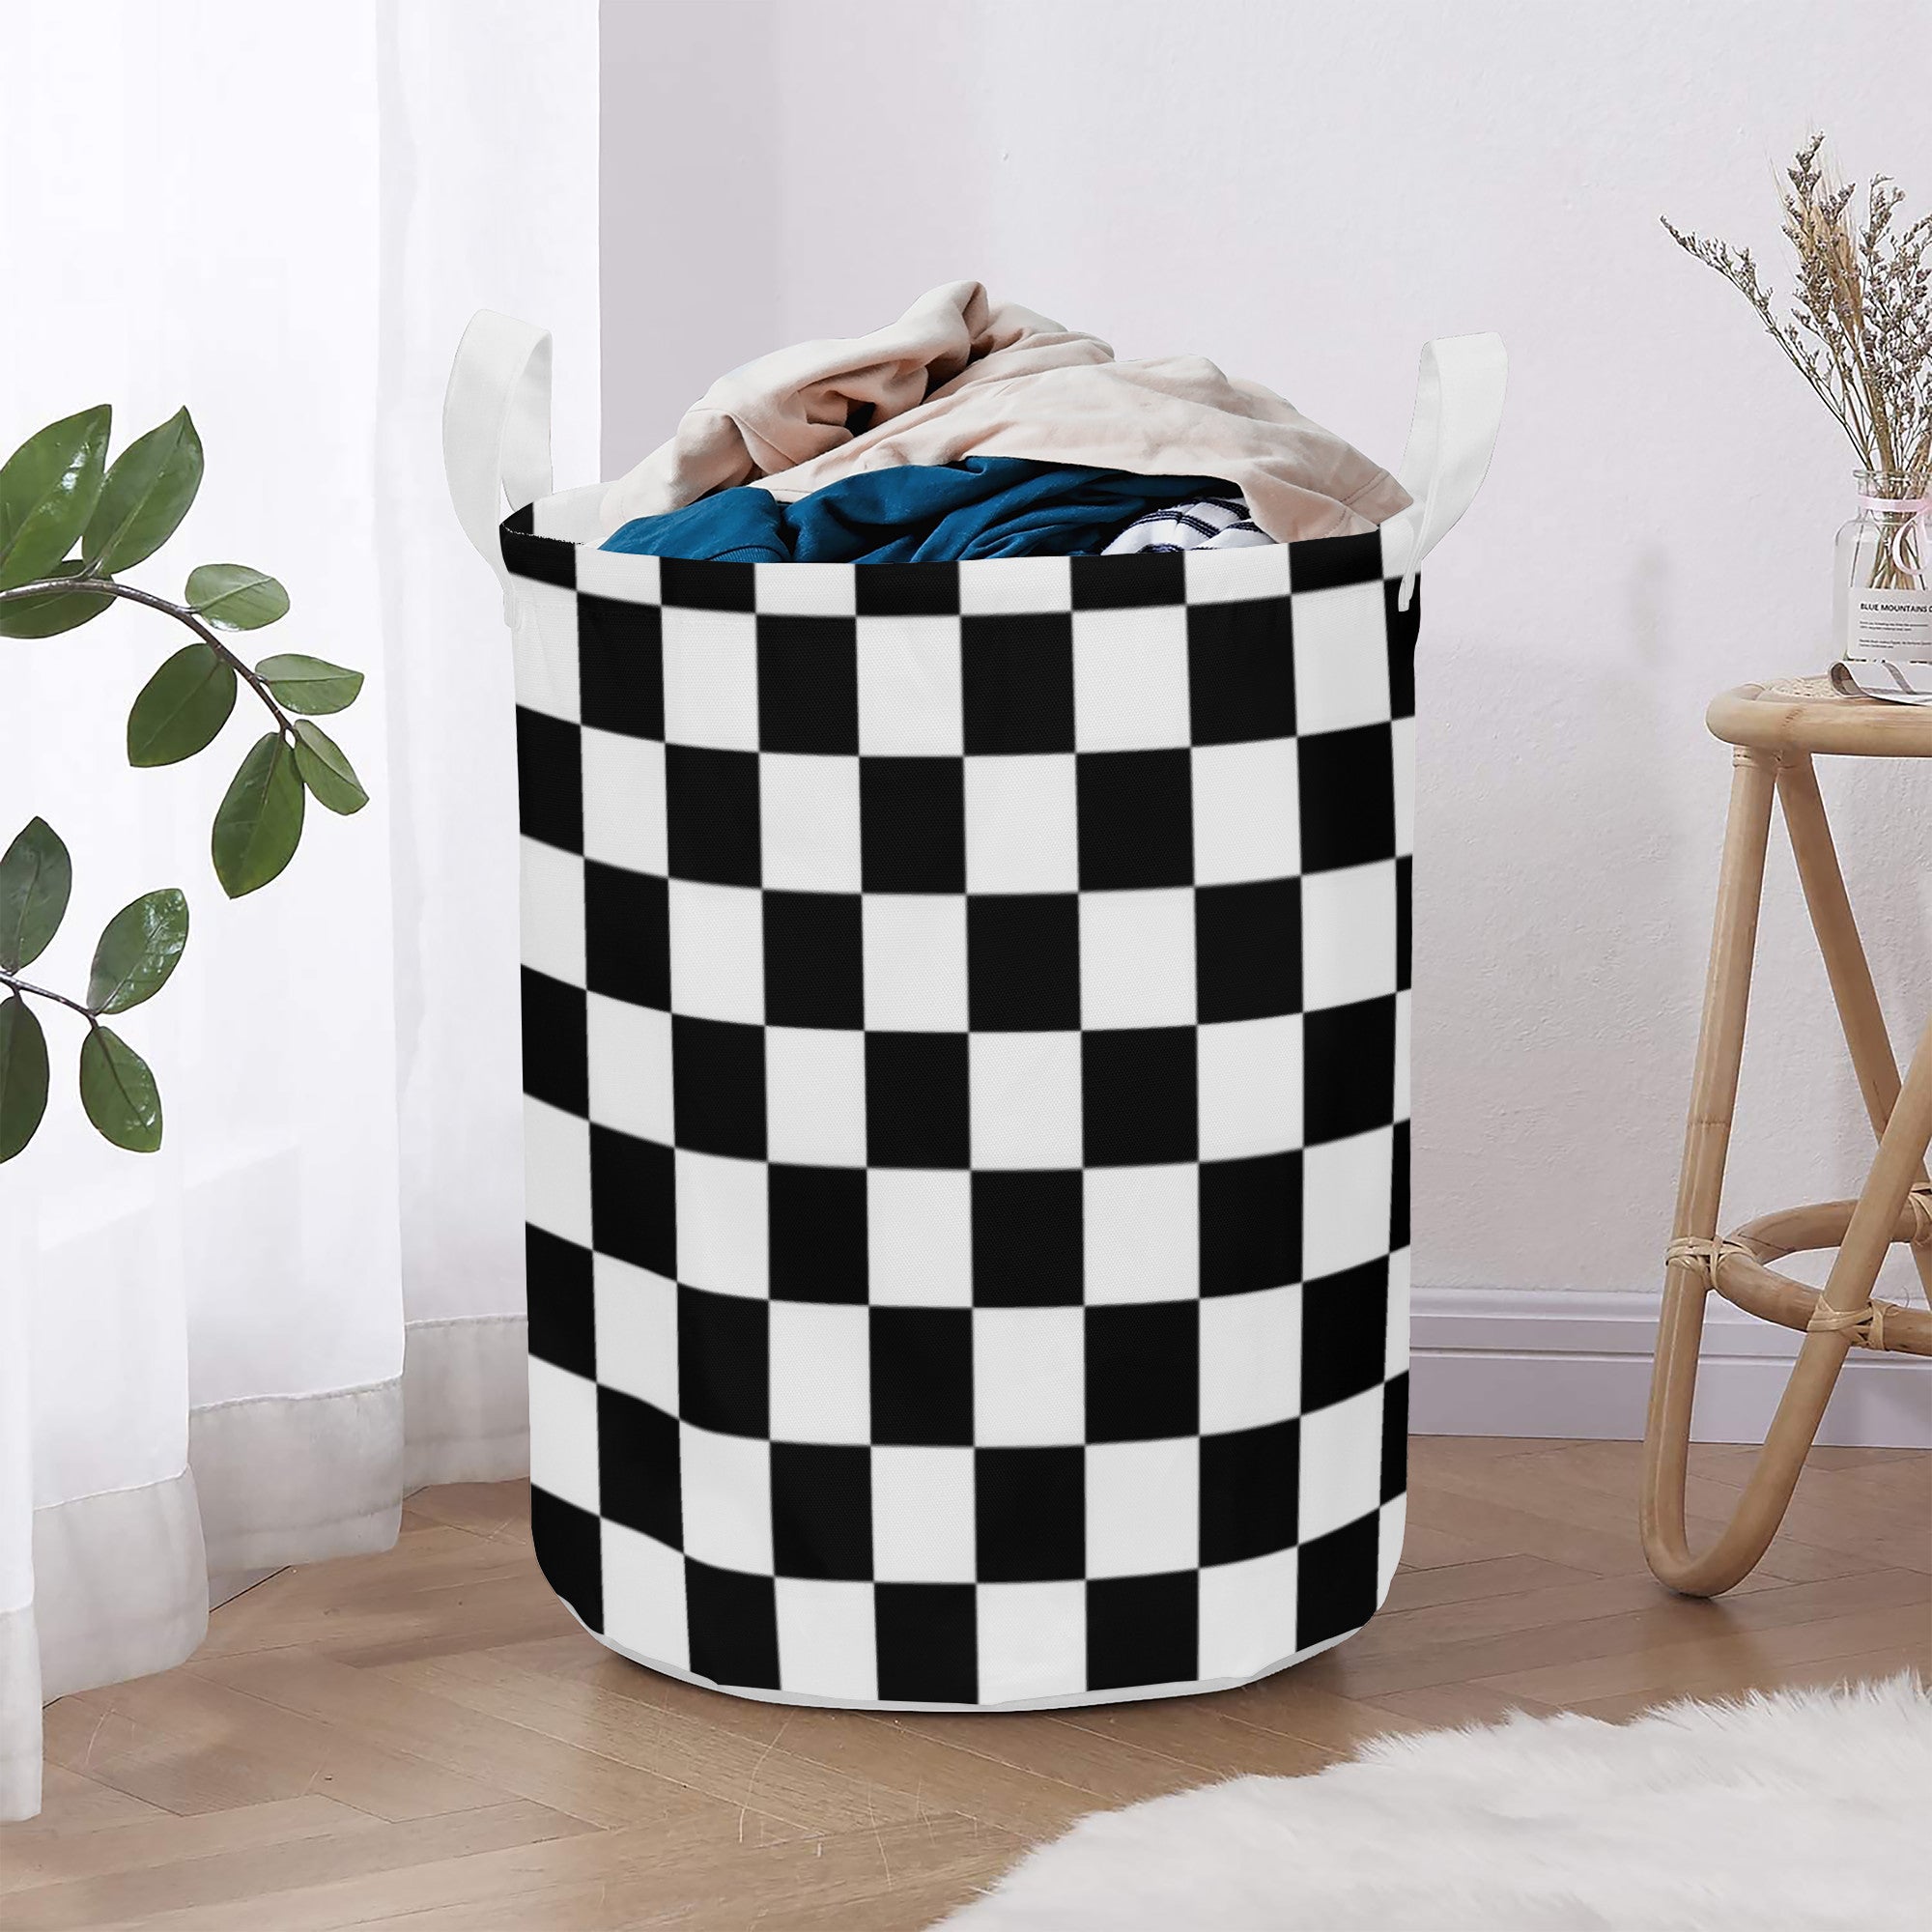 Round Laundry Basket Black and White Home-clothes-jewelry